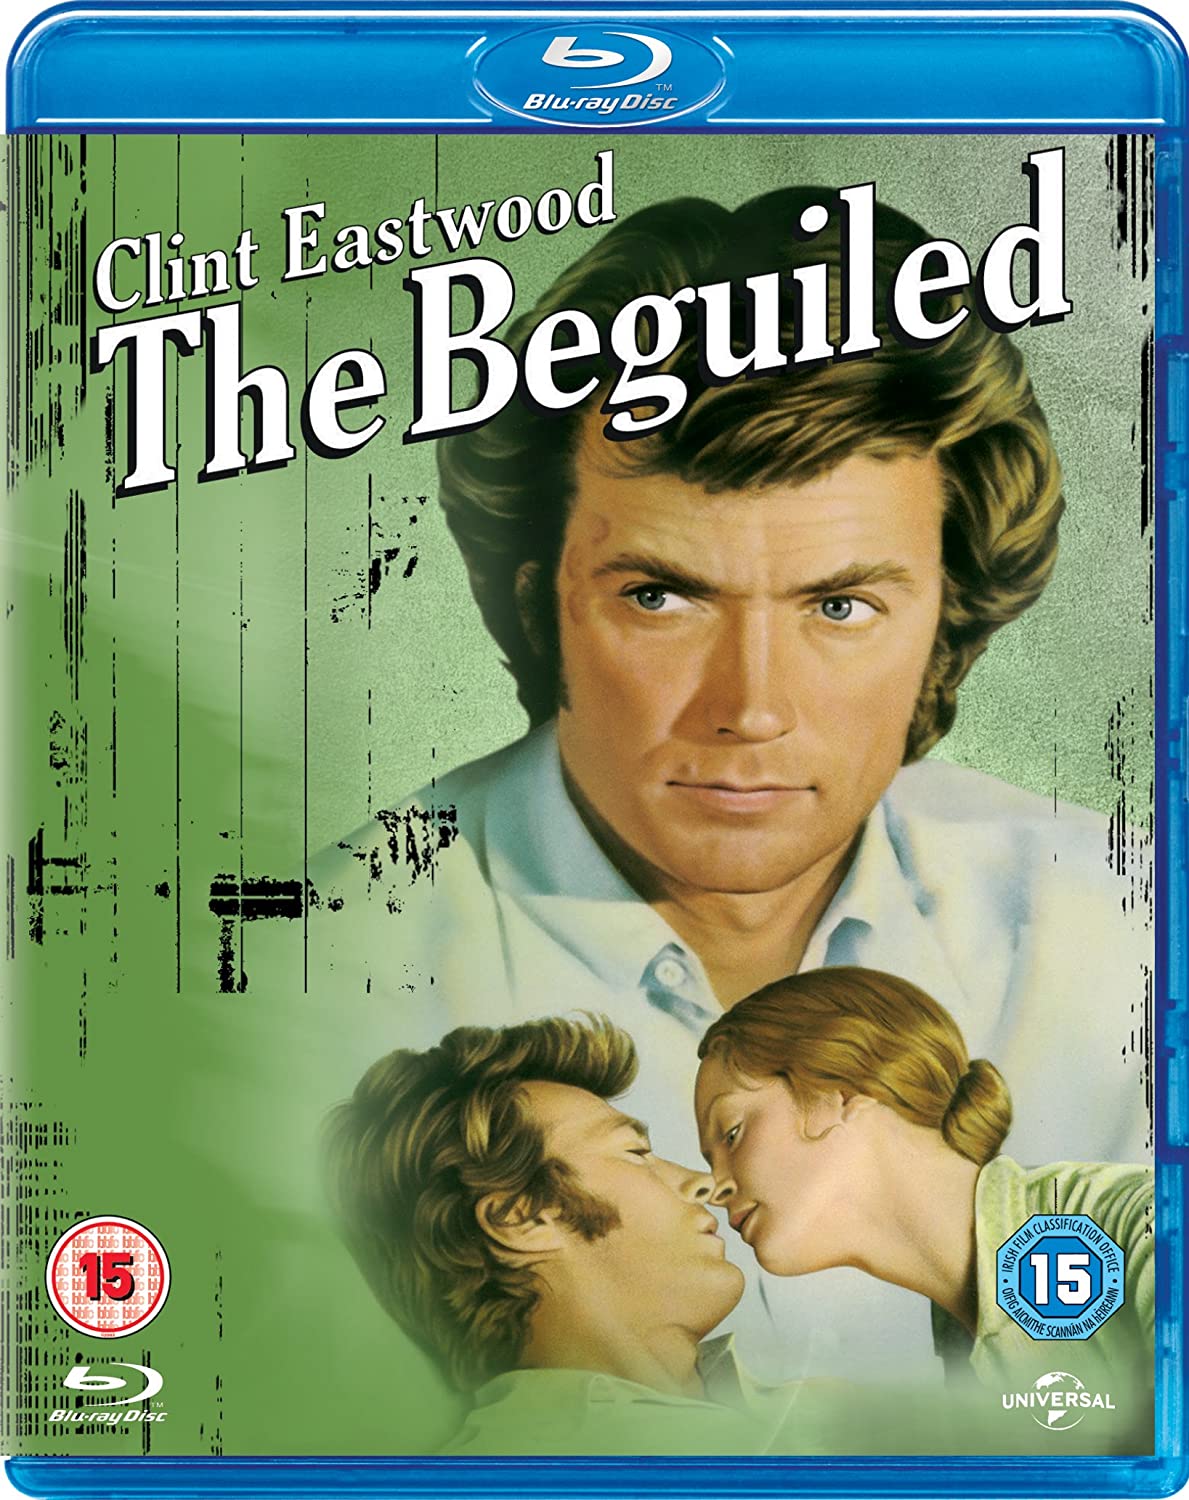 The Beguiled (Blu-ray)